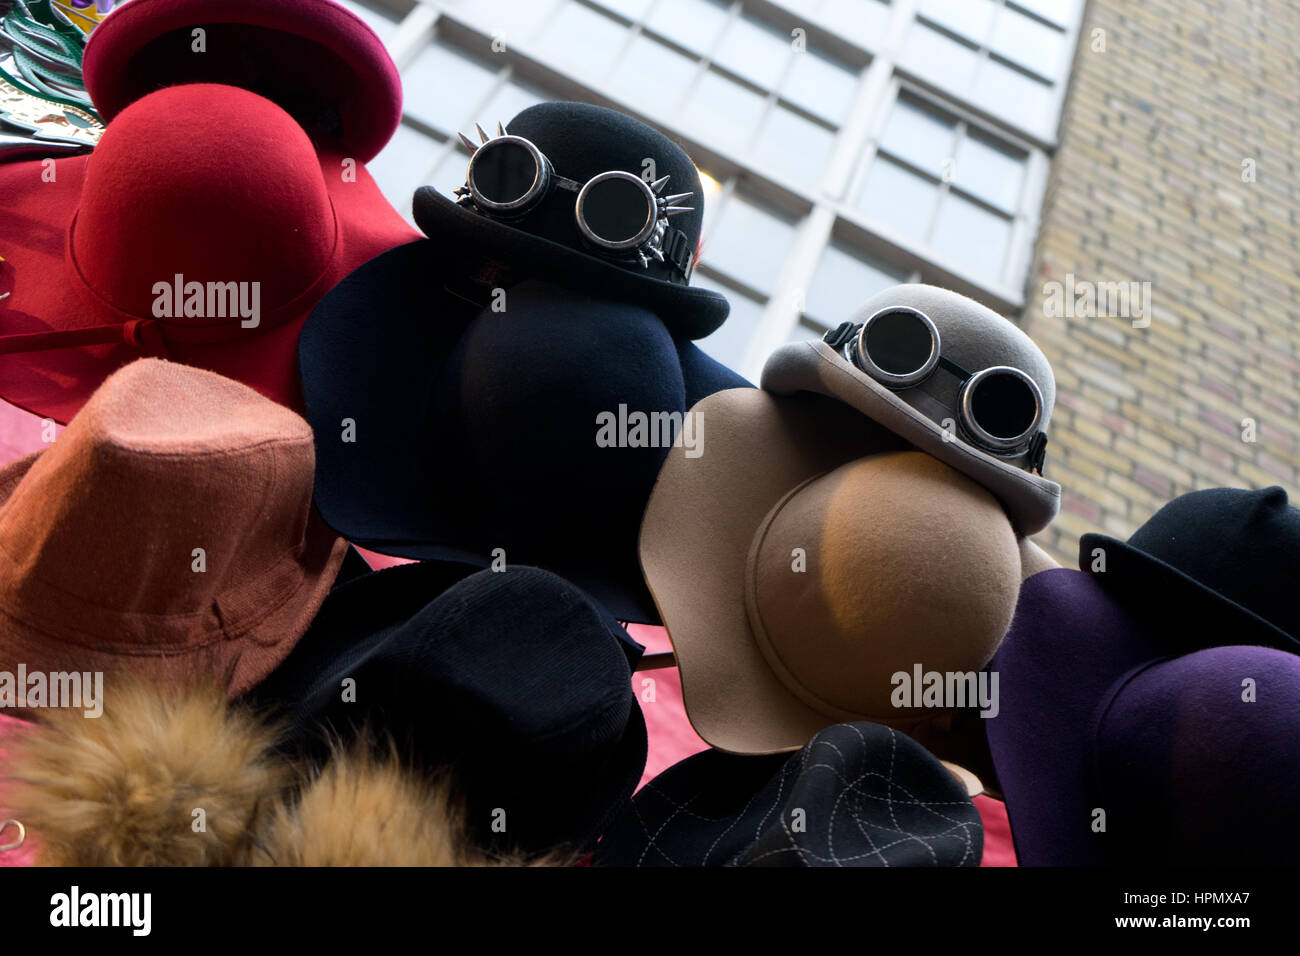 hats for sale for both men and women. Stock Photo